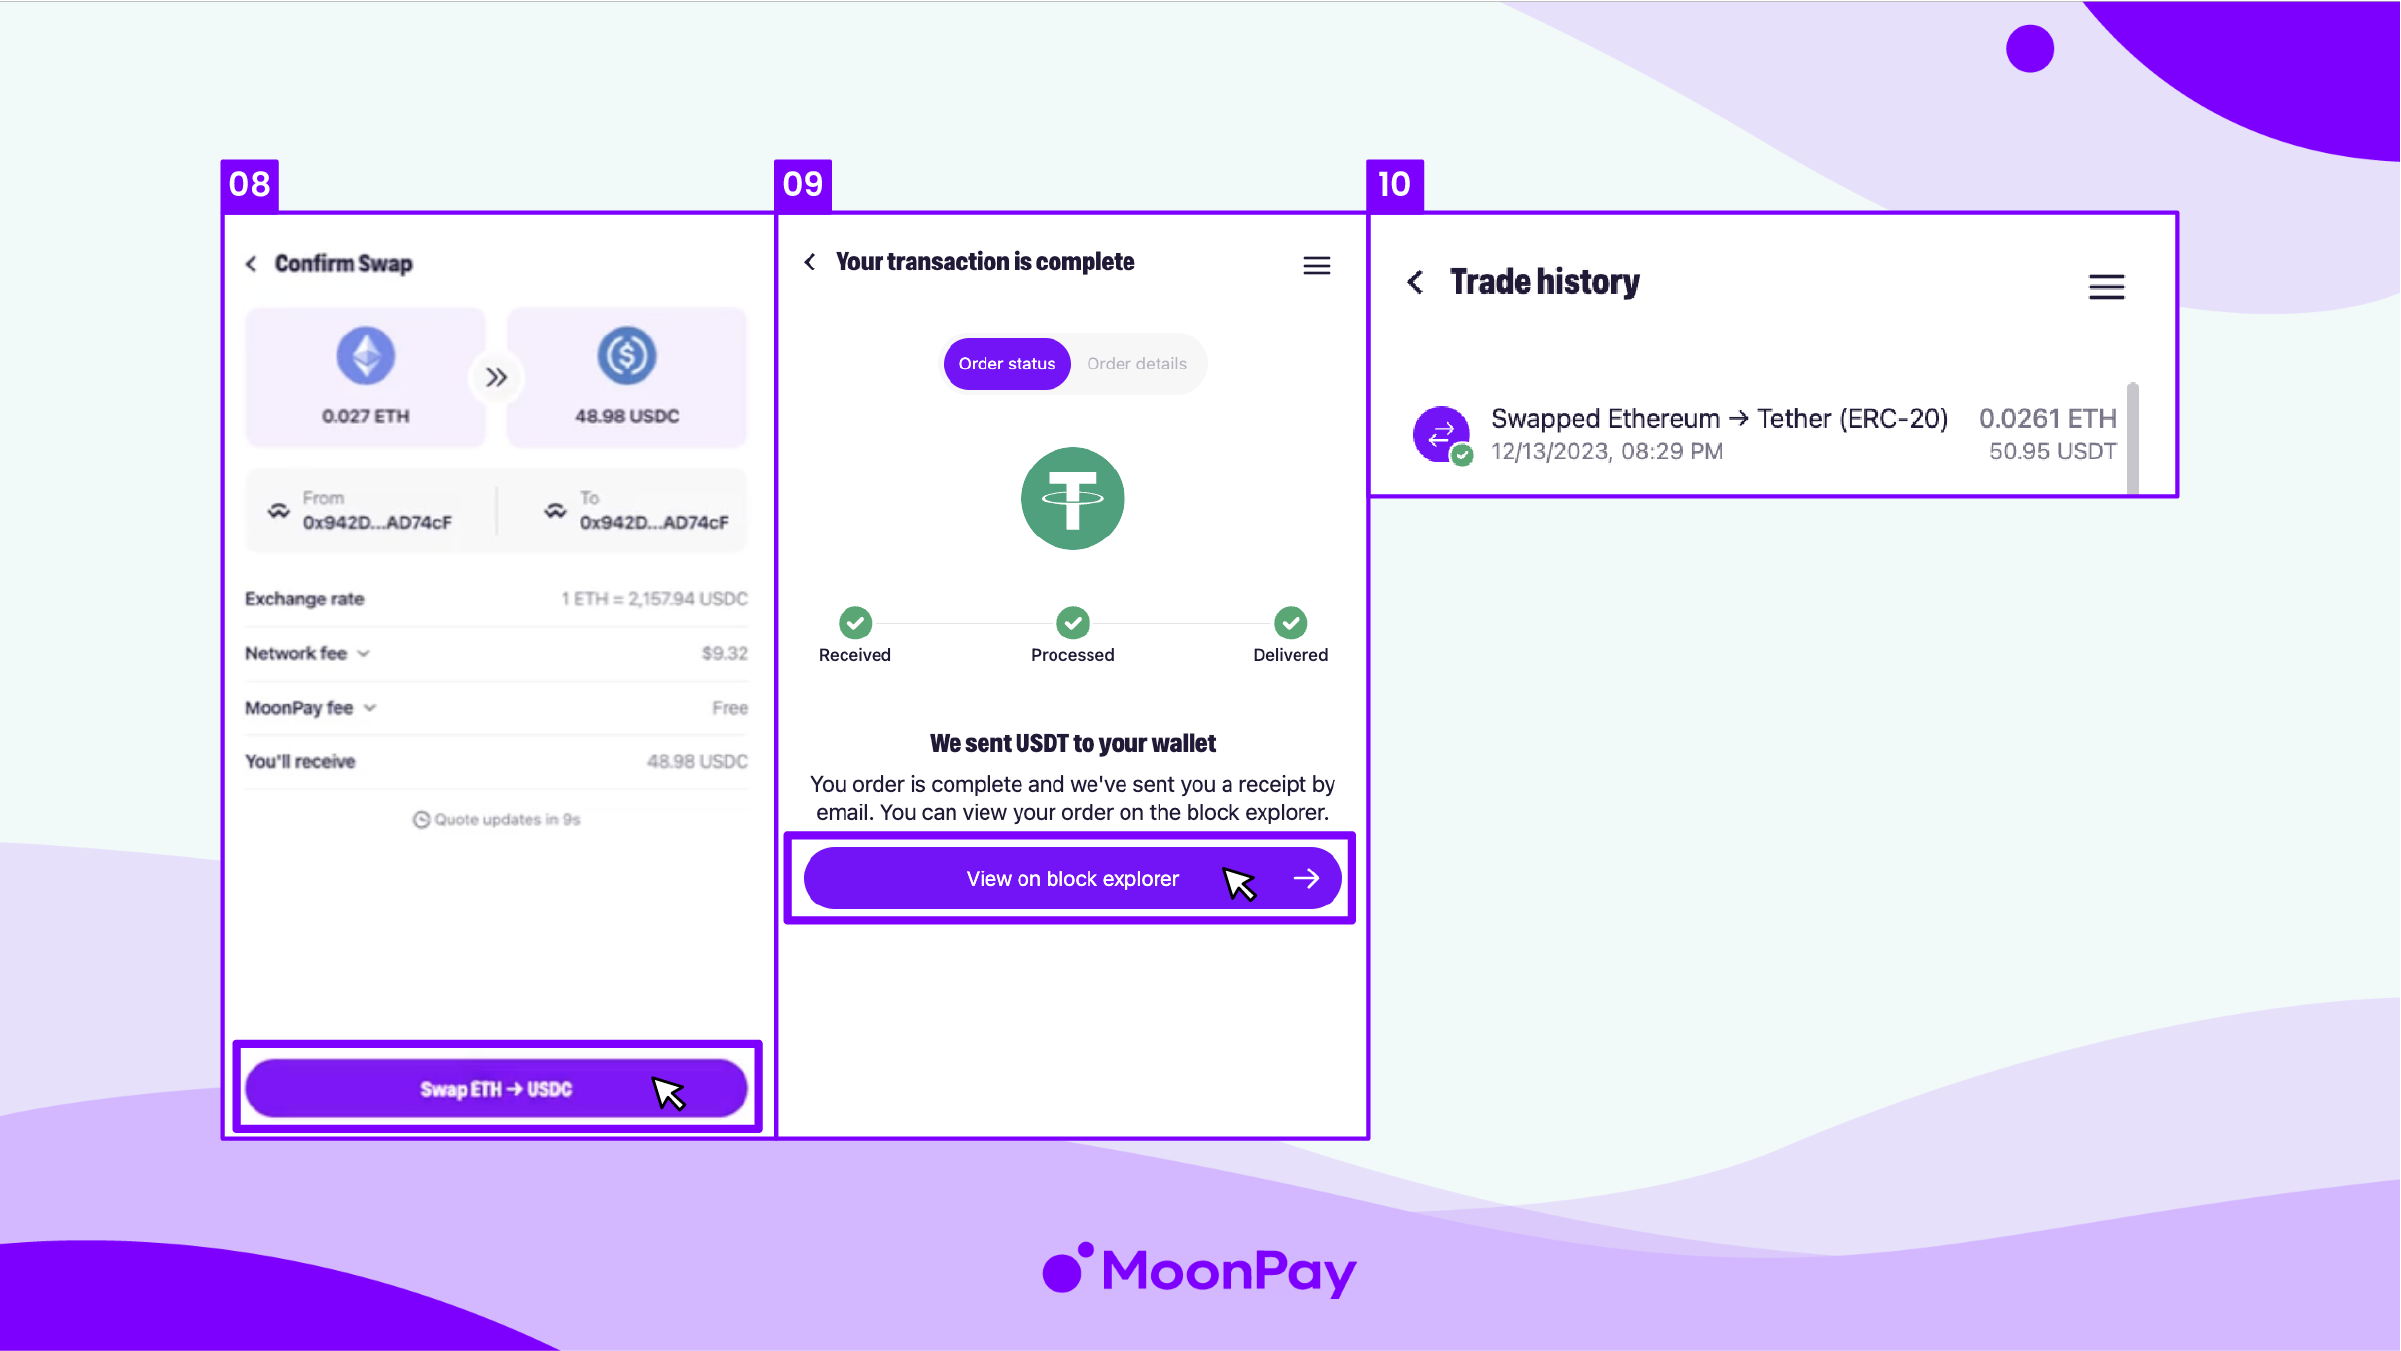 Steps 8-10 on the MoonPay website on how to swap.